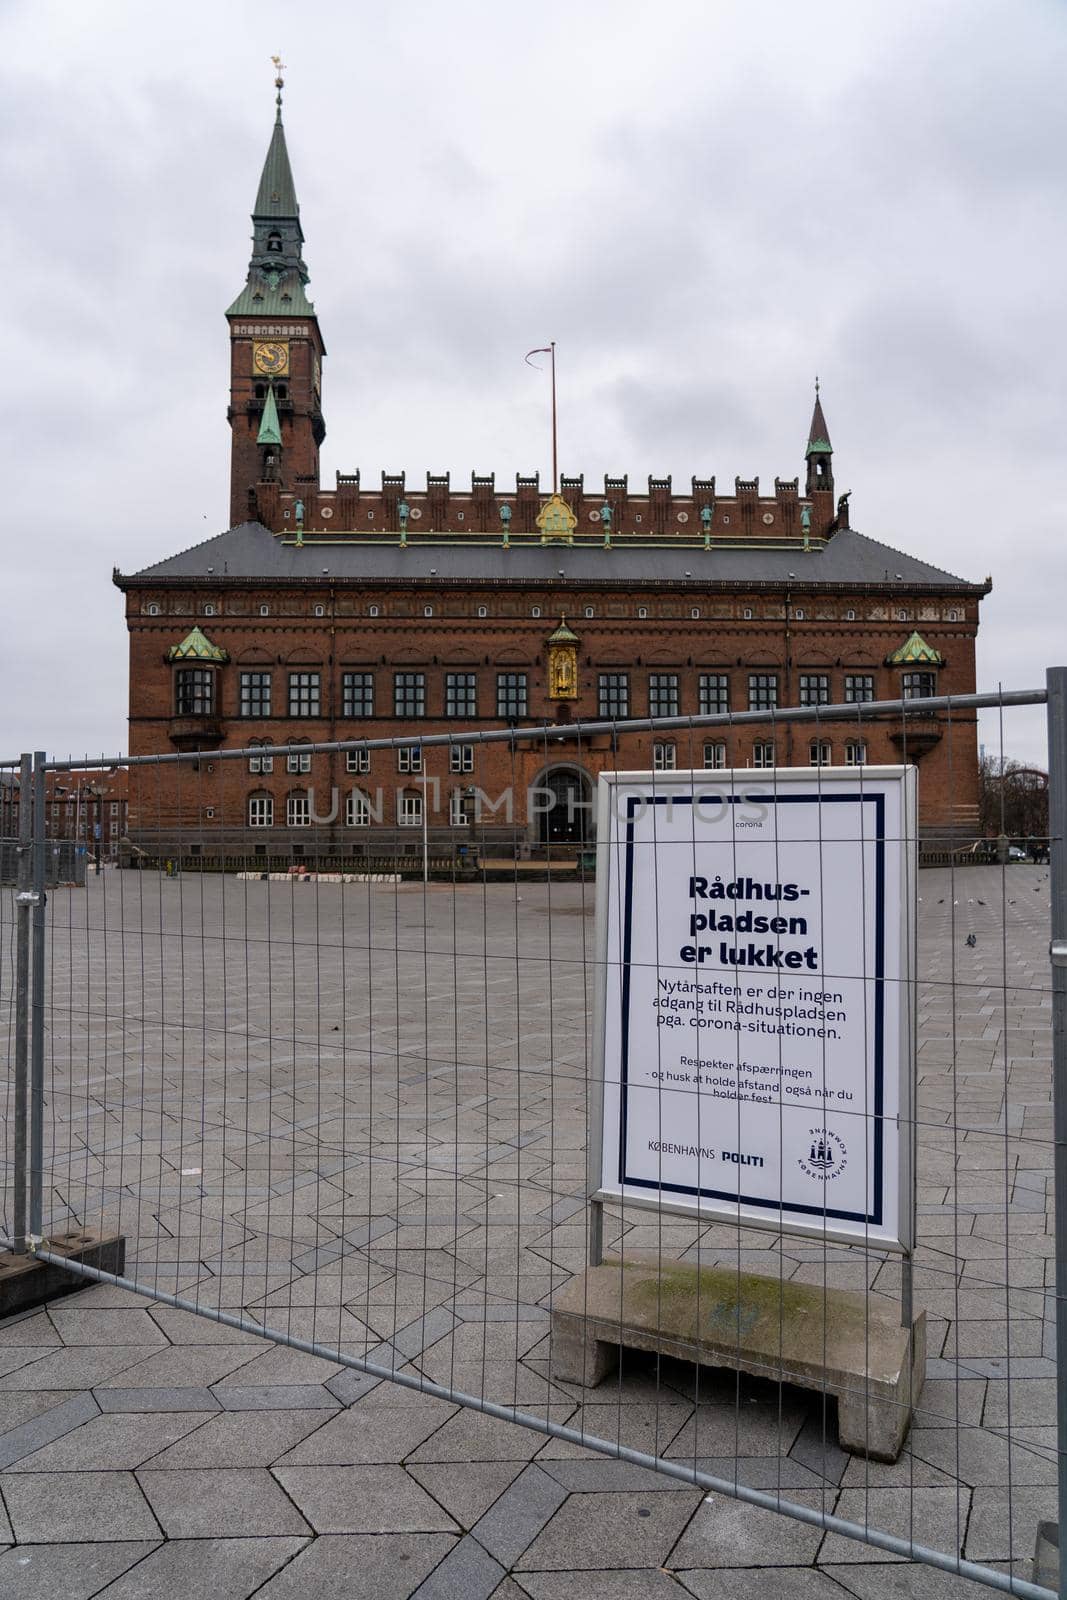 Copenhagen, Denmark - December 31, 2020: The town hall square is locked with barriers for New Year's celebration due covid-19.